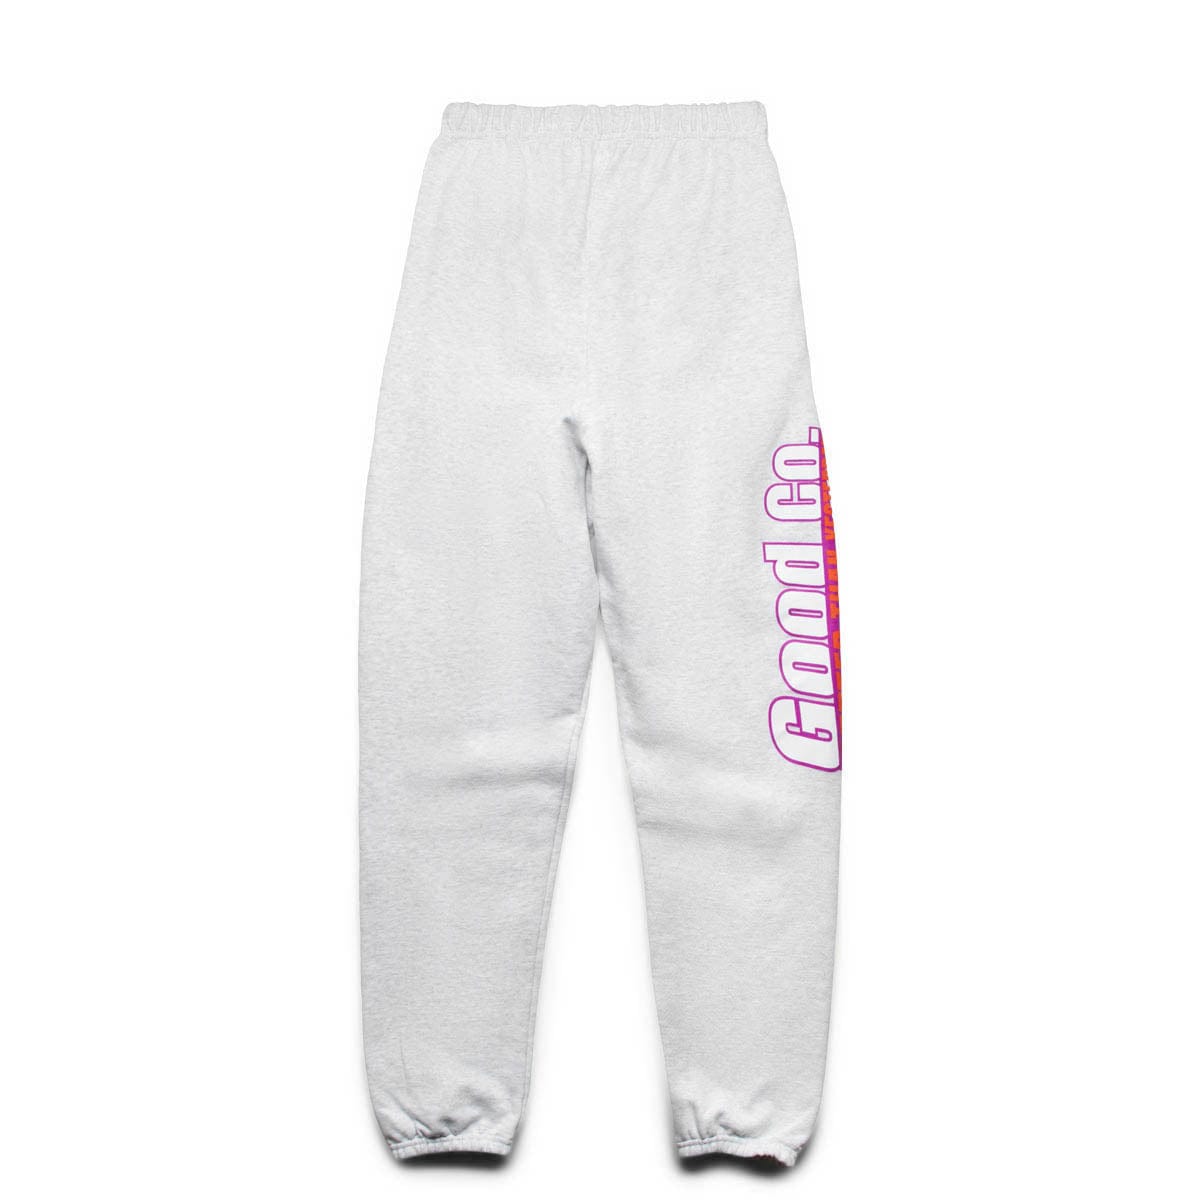 The Good Company Bottoms STAY READY SWEATPANTS